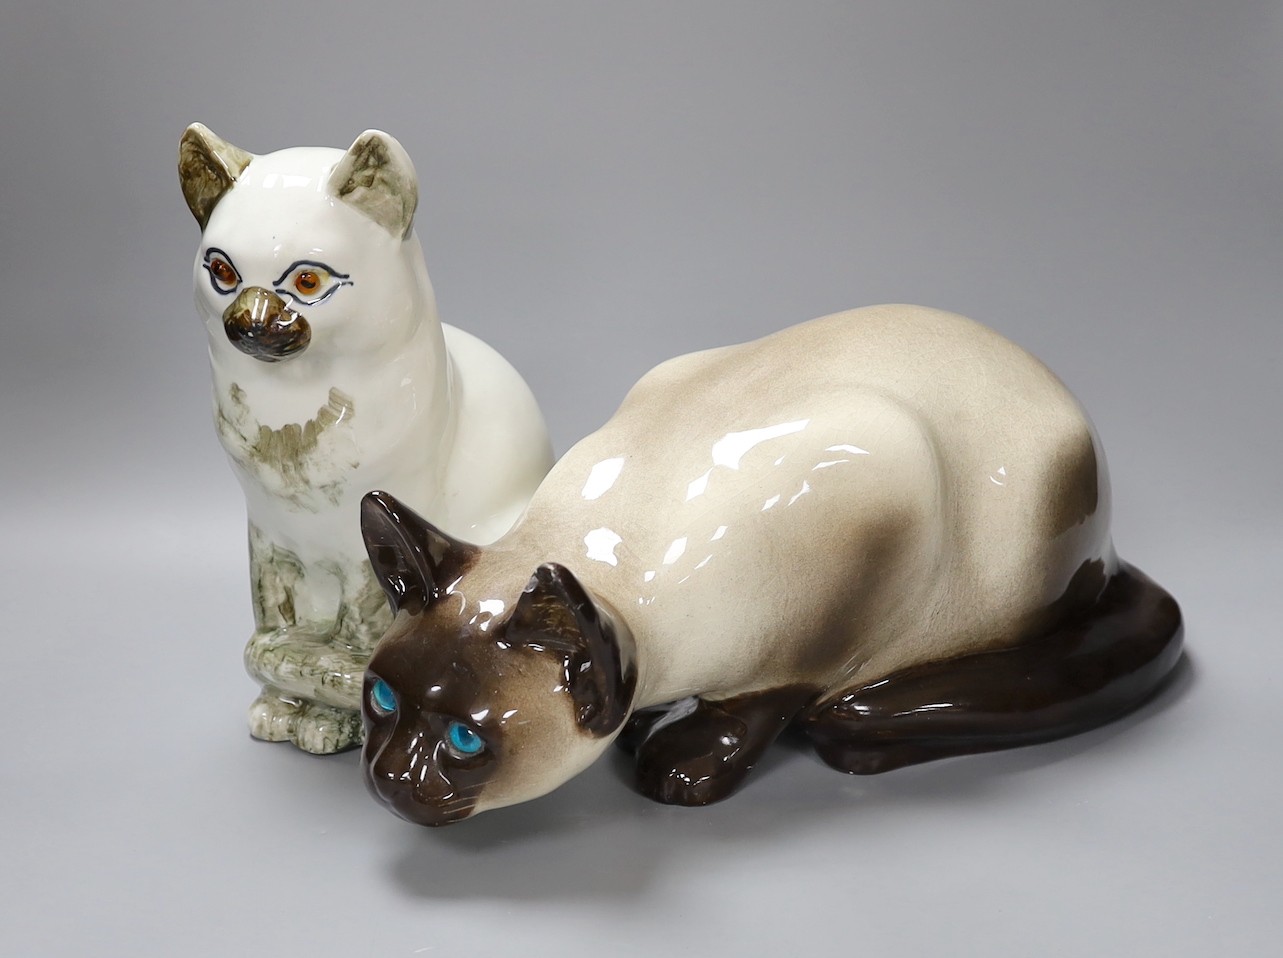 A Kensington ceramic lurking Siamese cat with blue glass eyes by Winstanley, together with